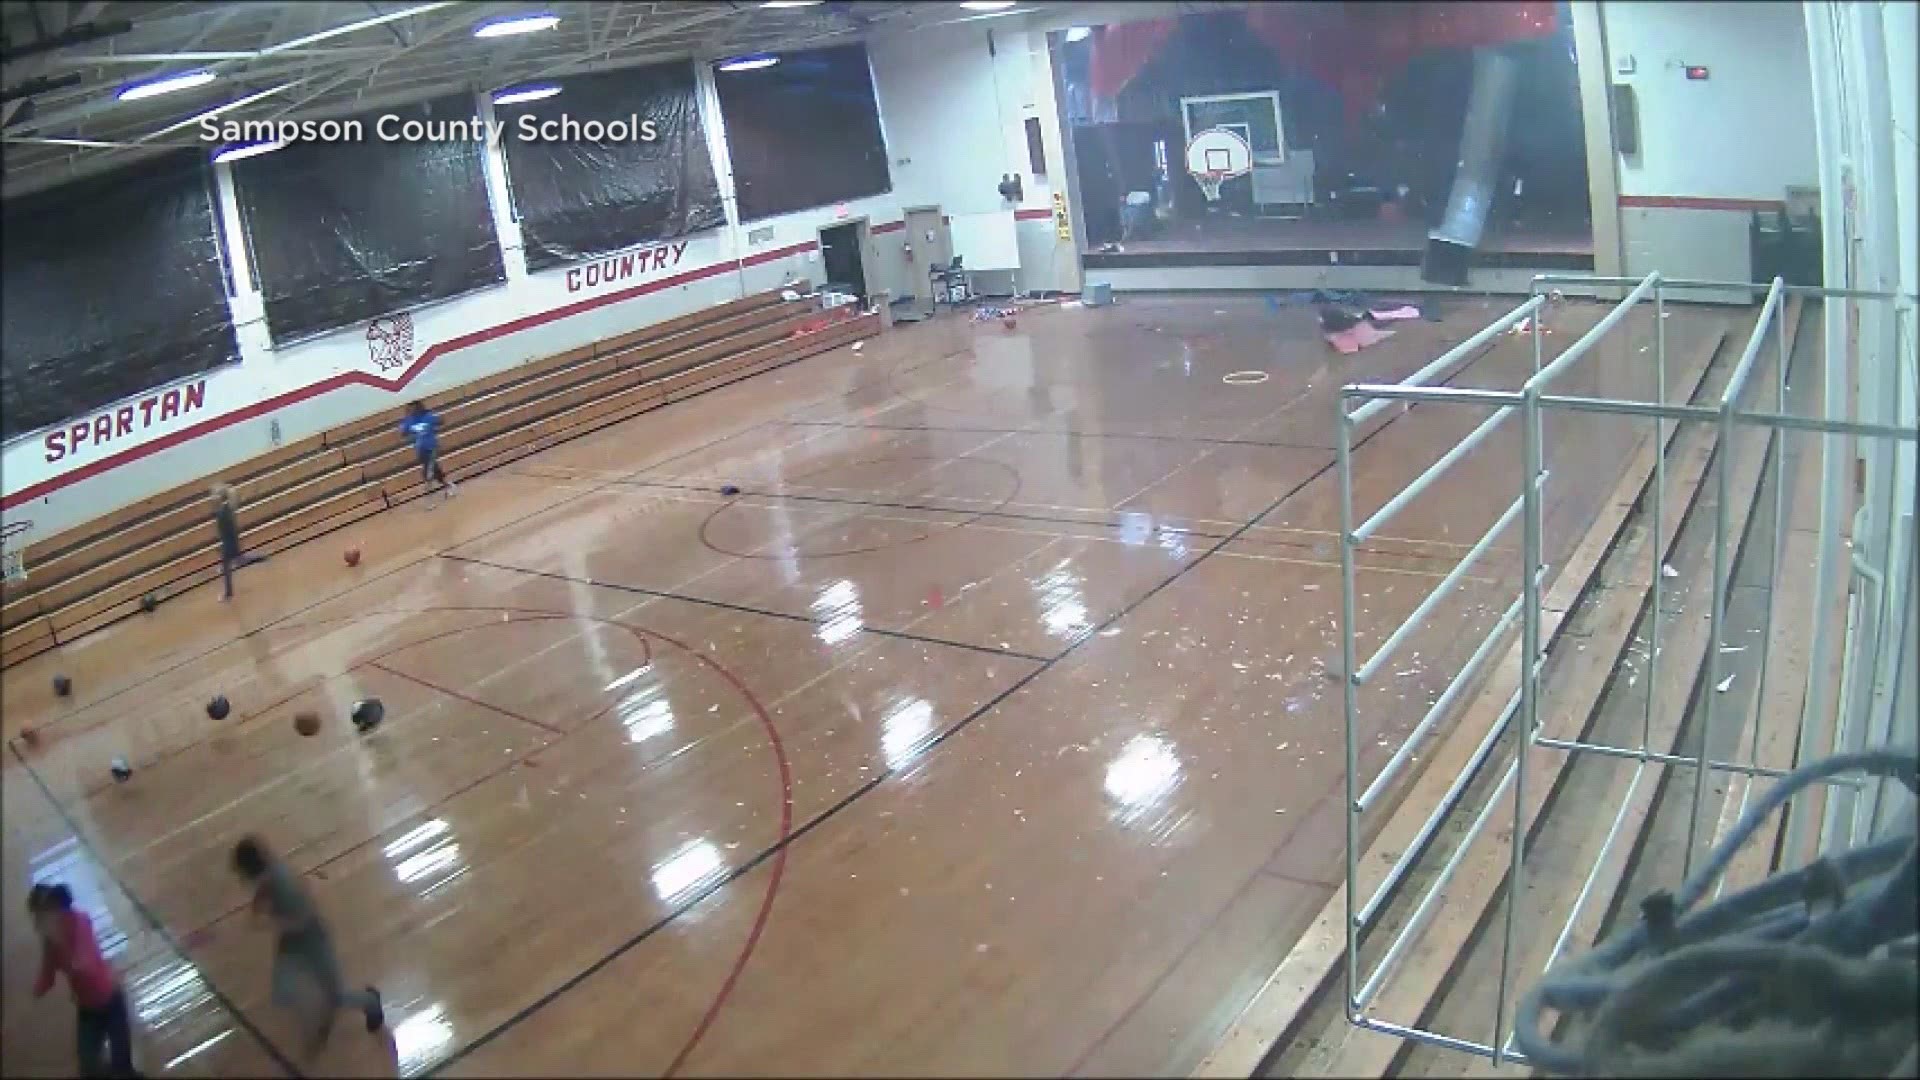 Video from inside a Sampson County school in NC shows children running as a microburst tears part of the gym’s roof.